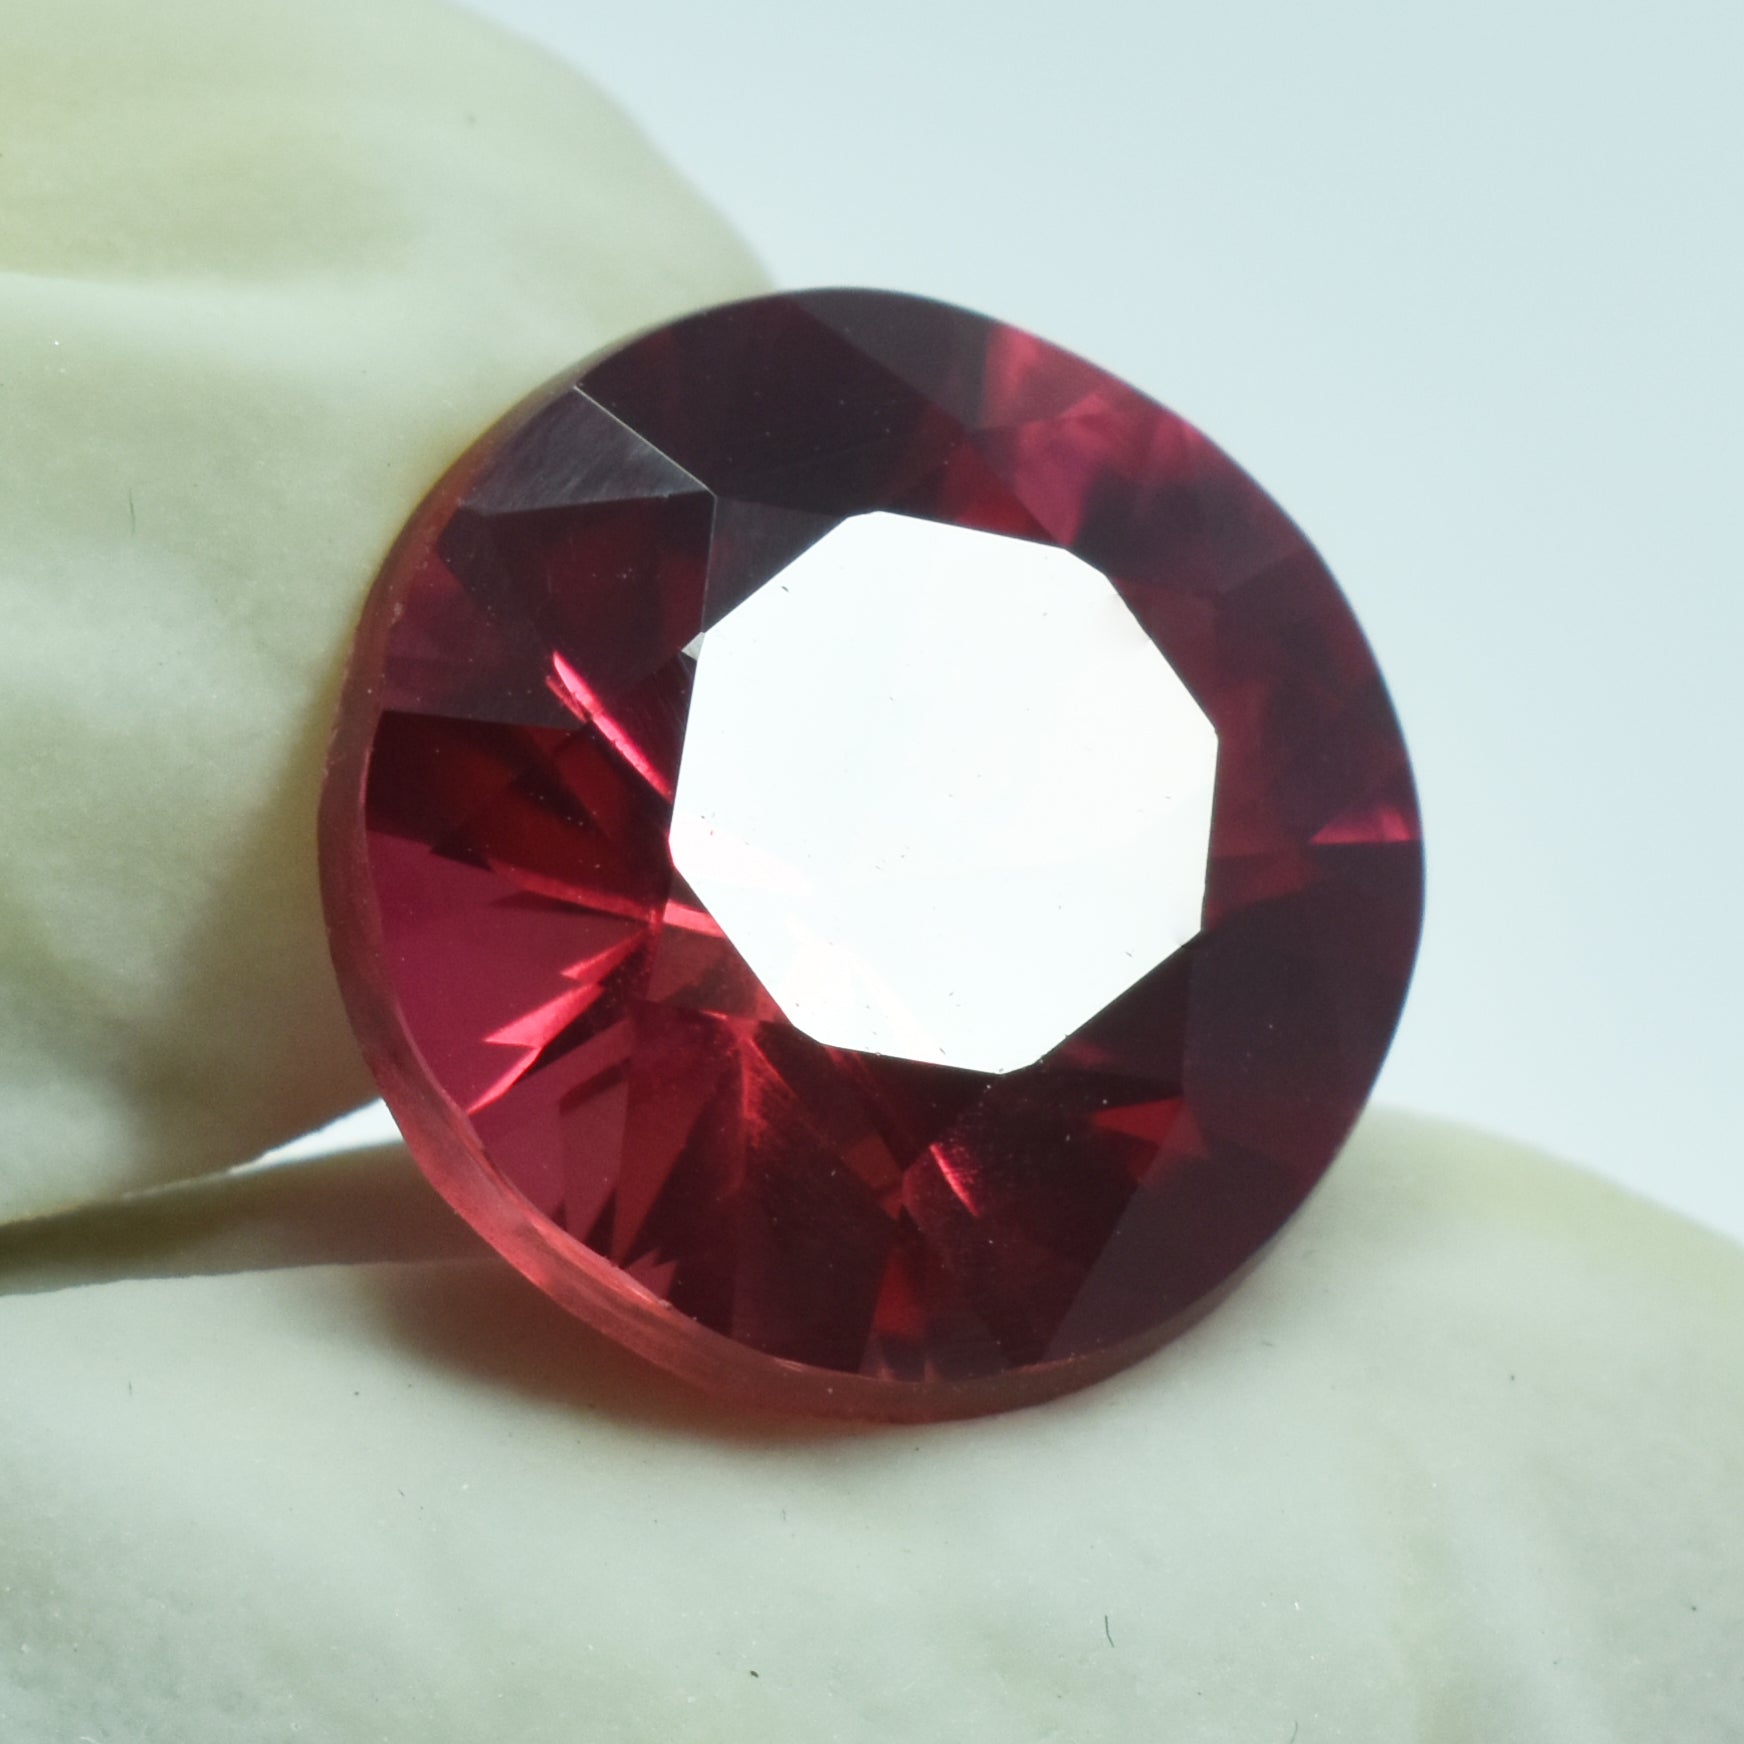 Jwelery Making Gemstone For Gift 8.65 Carat Beautiful Sapphire Gem Natural Padparadscha Sapphire A++ Quality Certified Loose Gemstone | Free Standard Delivery FREE Gift | Best Offer